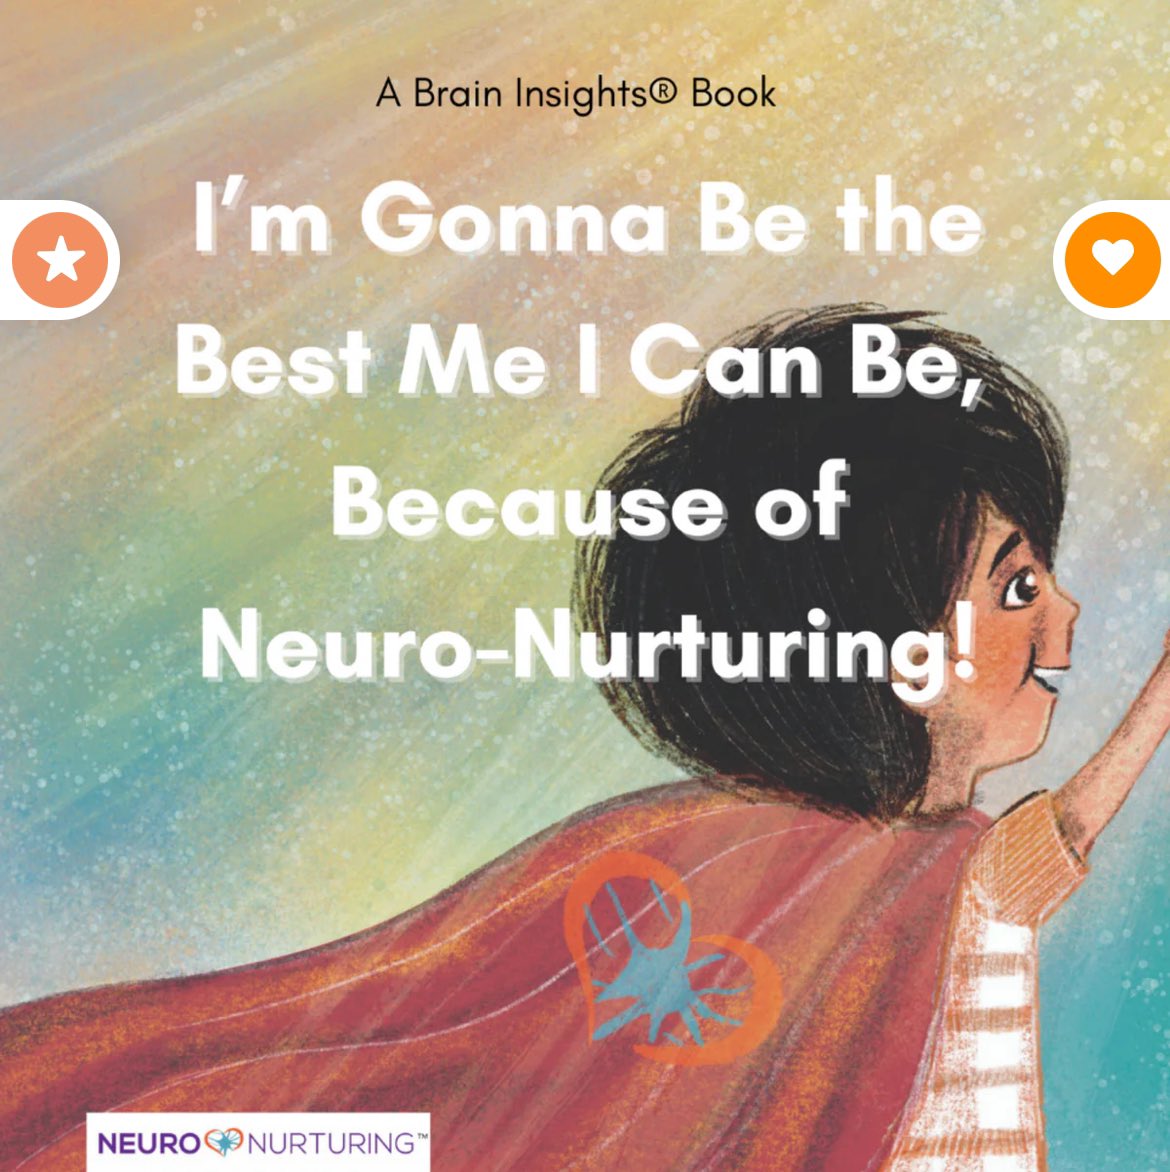 Another NEW publication I am THRILLED to share with you … I have created a children’s book!! AND it includes parent pages for caring adults! 🧡 I'm Gonna Be the Best Me I Can Be Because of Neuro-Nurturing! Welcome to a world of wonder and thriving! In this beautifully